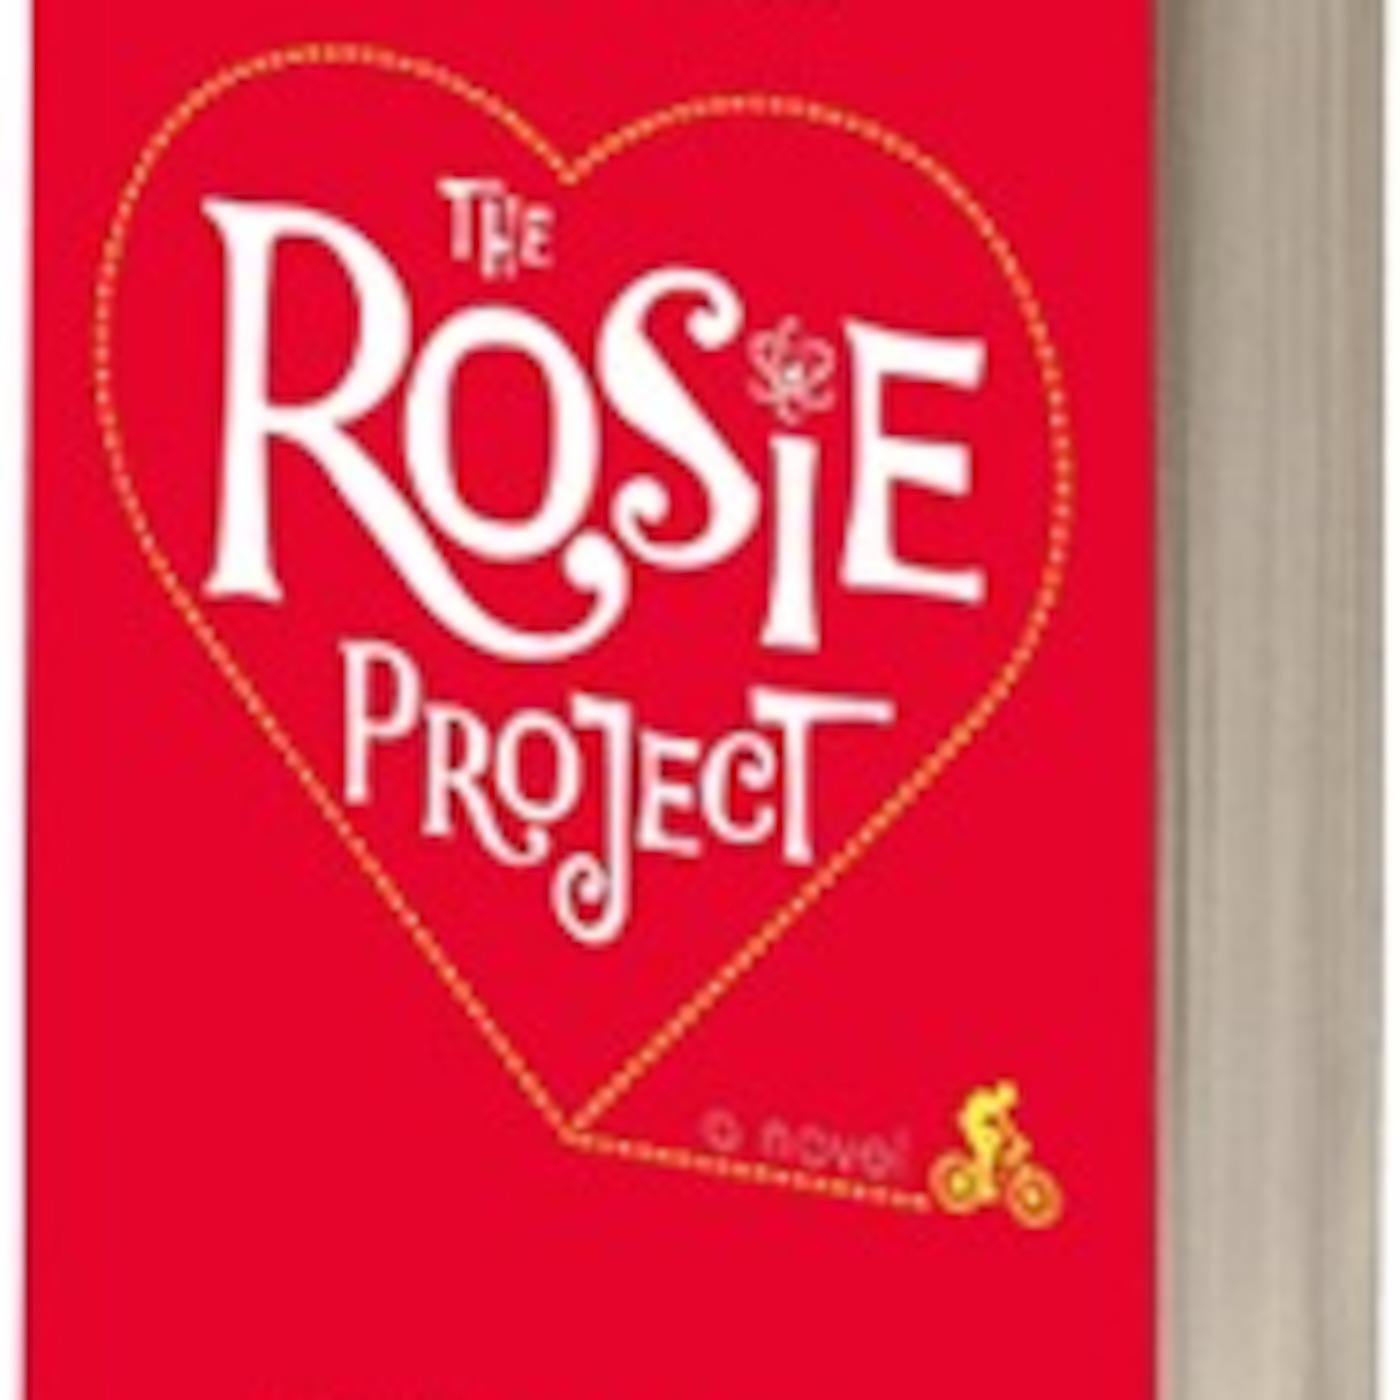 Reading Cove Podcast Episode #43 - Discussing THE ROSIE PROJECT by Graeme Simsion!